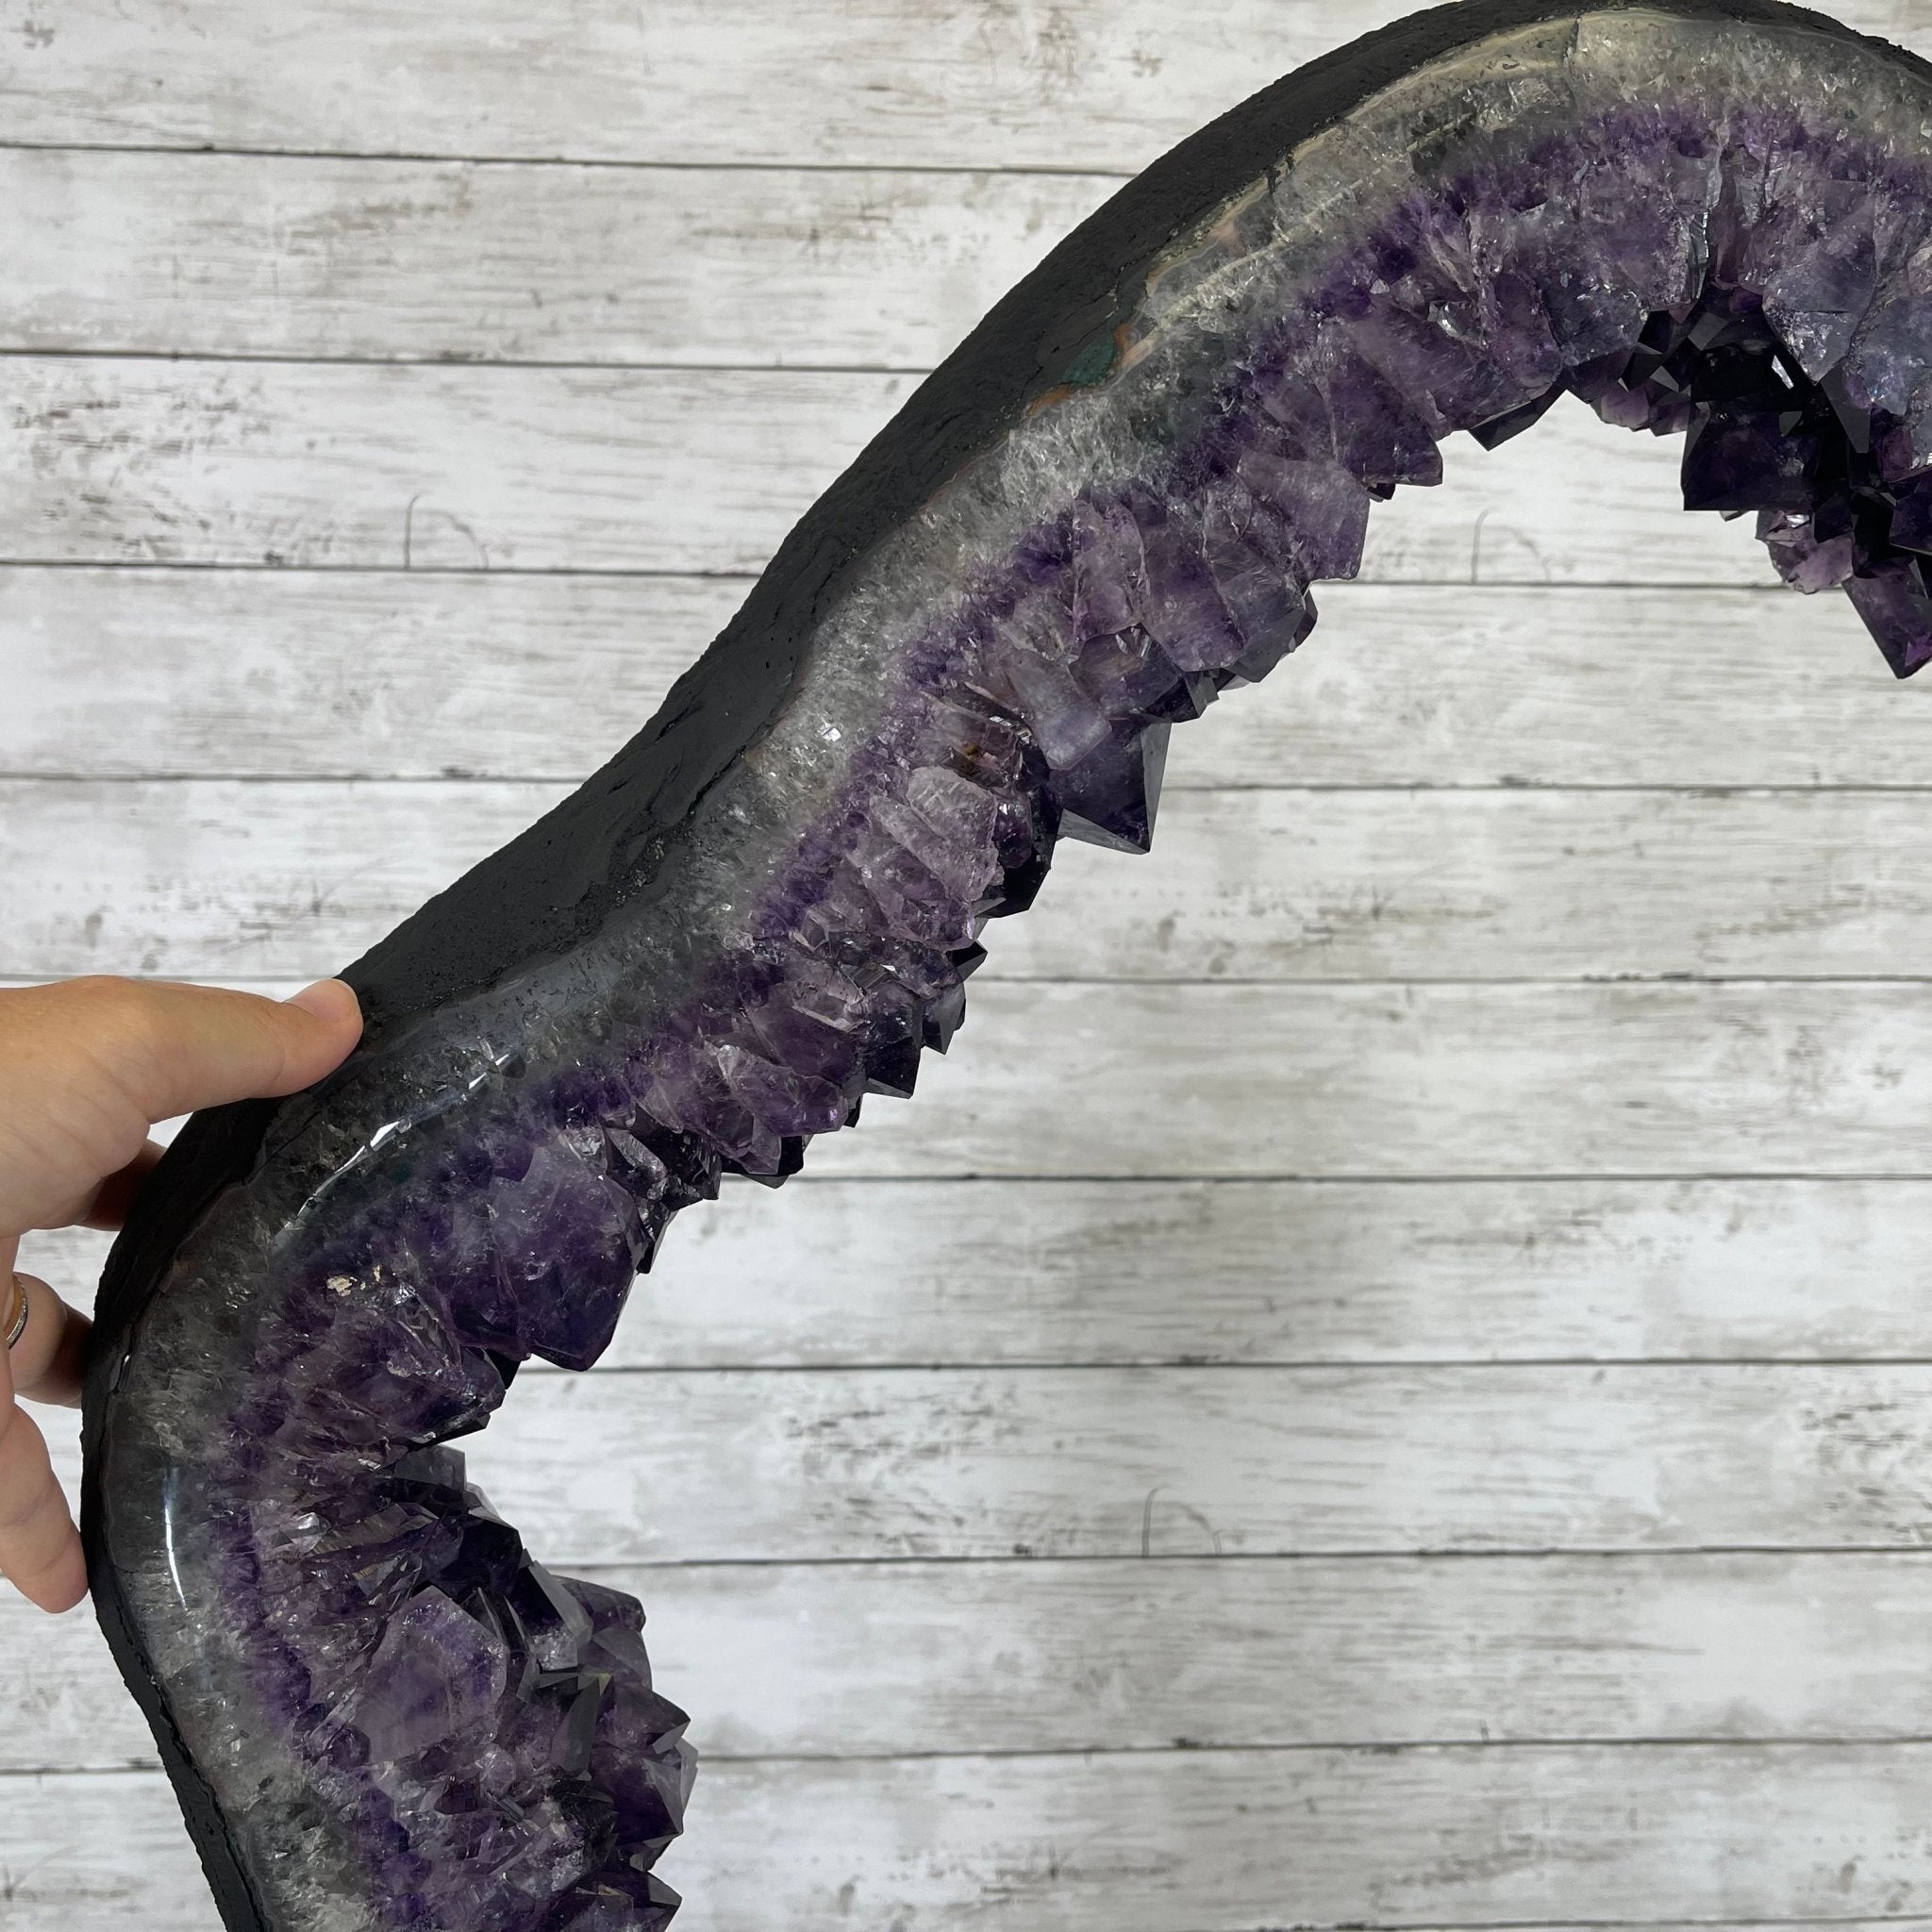 Super Quality Brazilian Amethyst Crystal Portal on a Tall Rotating Stand, 83.8 lbs & 70.7" tall Model #5604-0095 by Brazil Gems - Brazil GemsBrazil GemsSuper Quality Brazilian Amethyst Crystal Portal on a Tall Rotating Stand, 83.8 lbs & 70.7" tall Model #5604-0095 by Brazil GemsPortals on Rotating Bases5604-0095